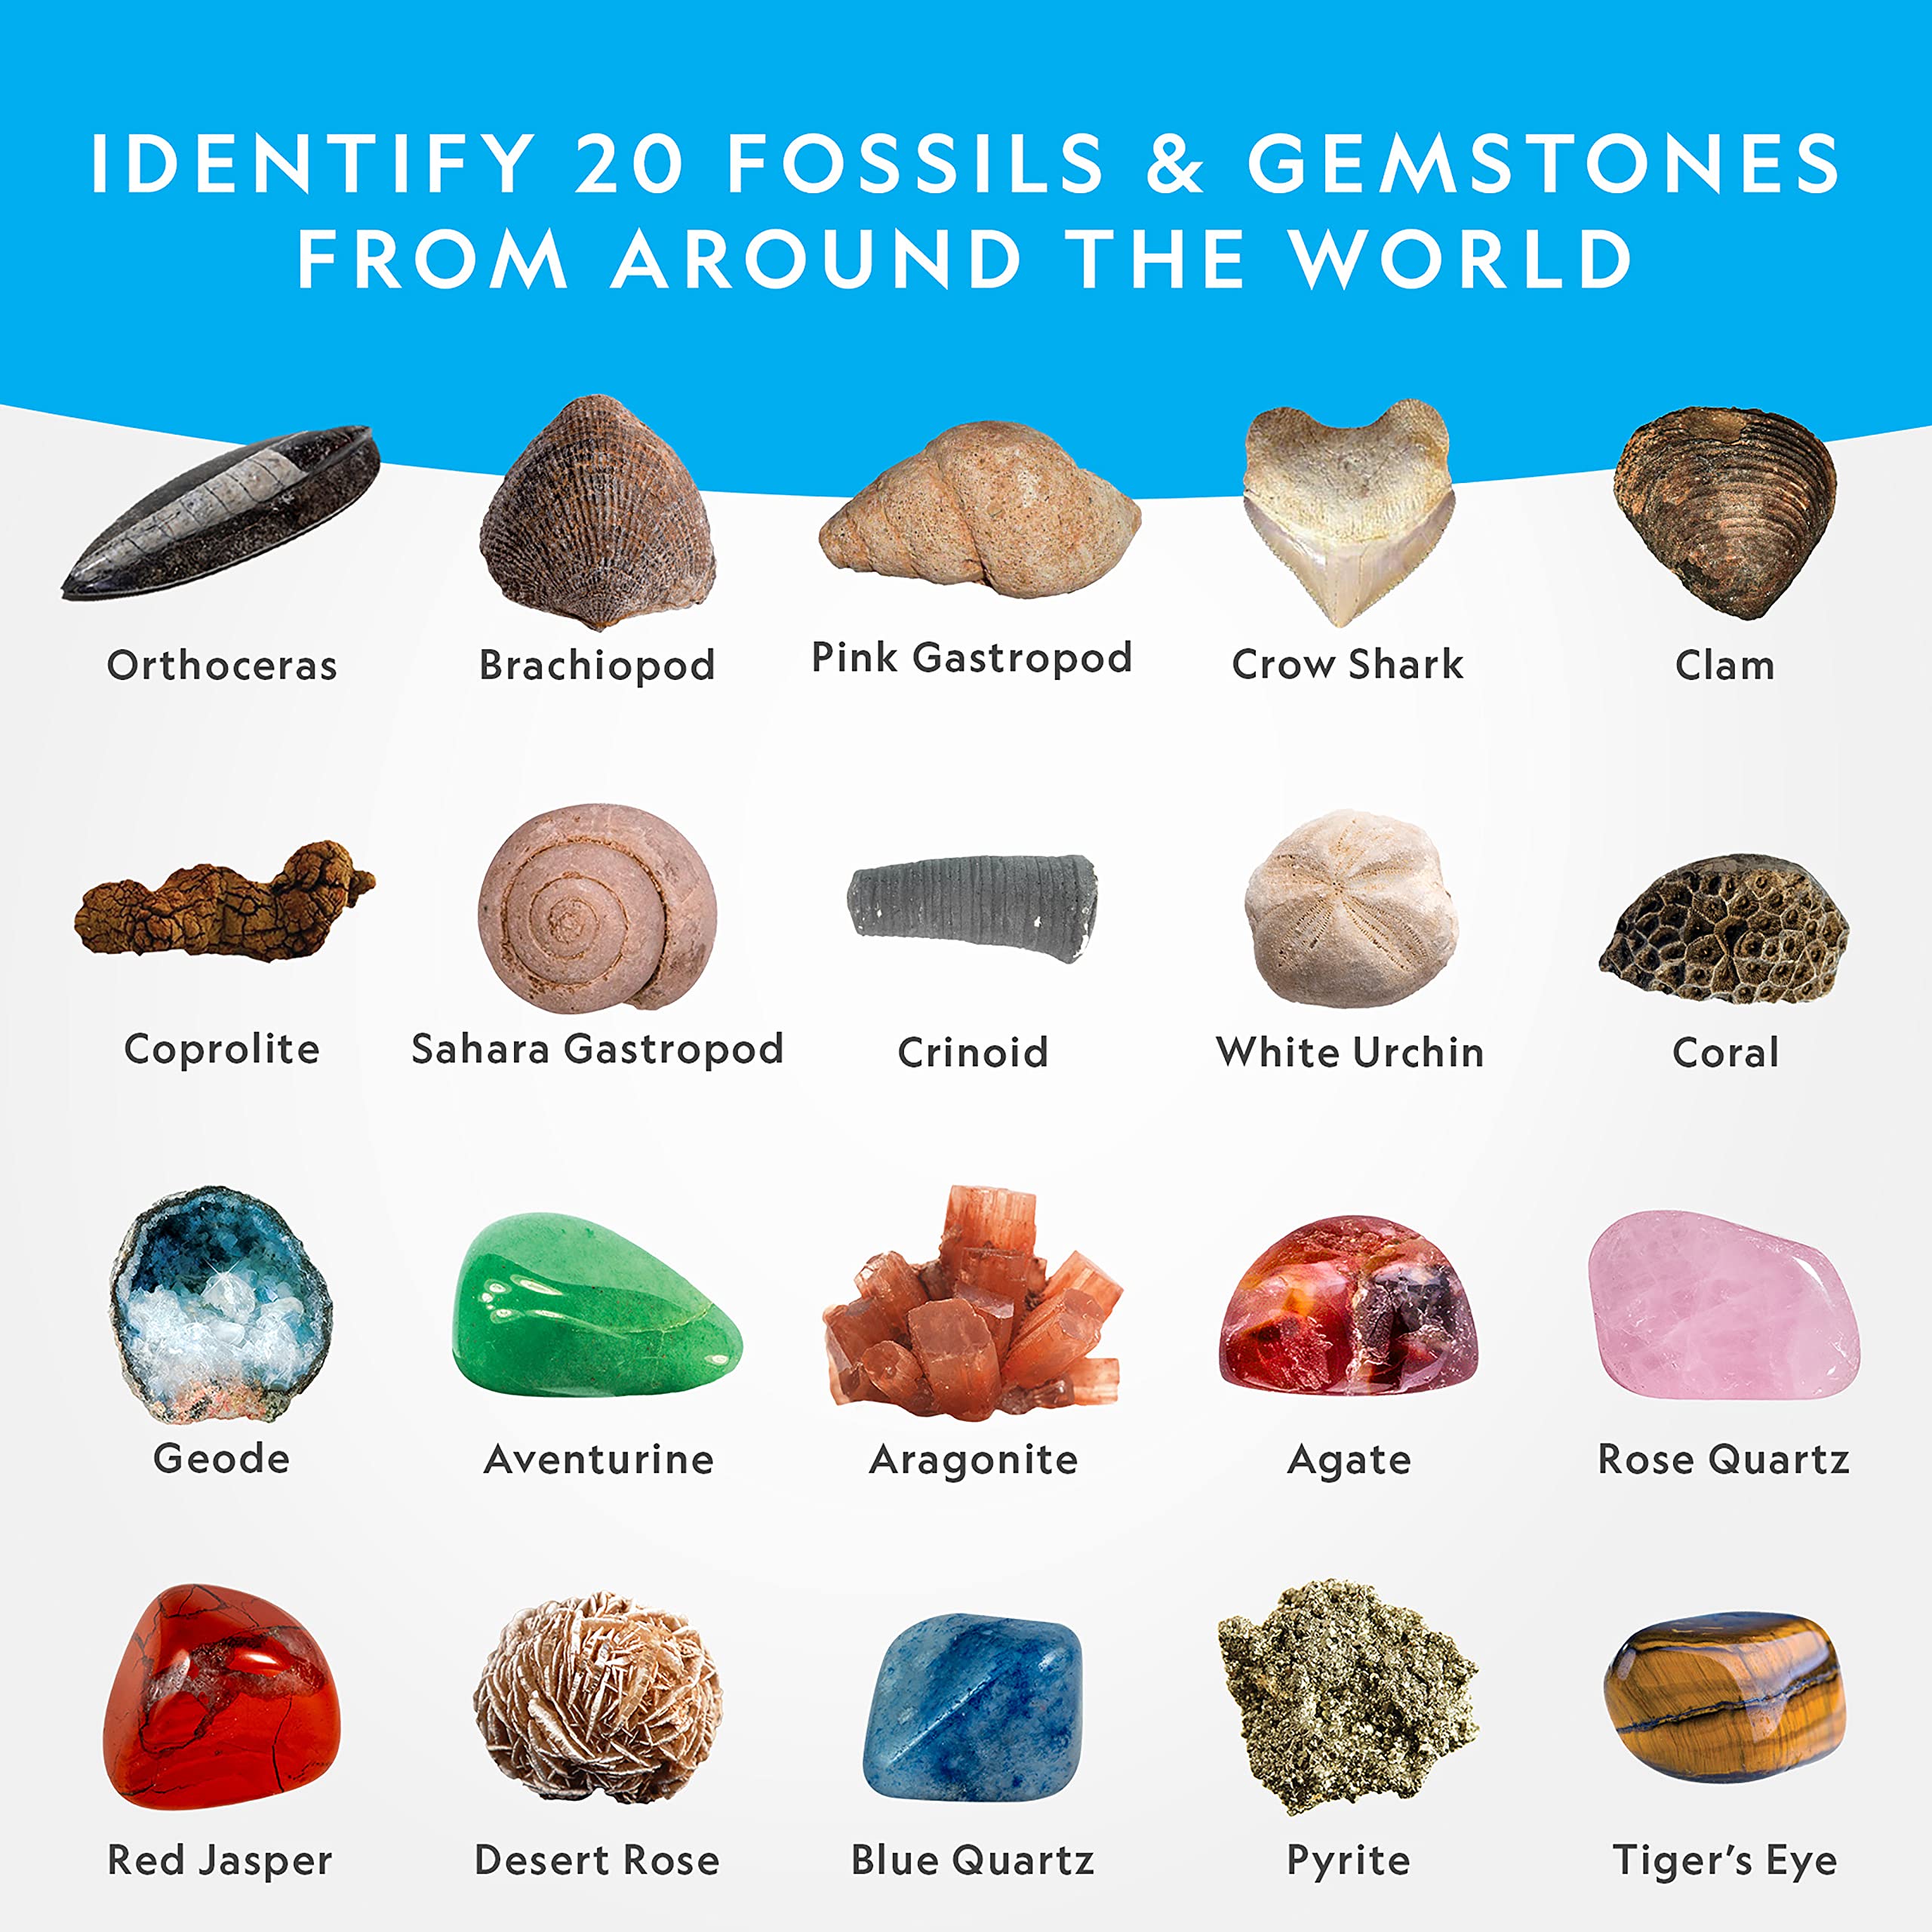 NATIONAL GEOGRAPHIC Mega Fossil and Gemstone Dig Kit - Excavate 20 Real Fossils and Gems, Science Kit for Kids, Rock Digging Excavation Kit, Geology Gifts for Boys and Girls (Amazon Exclusive)